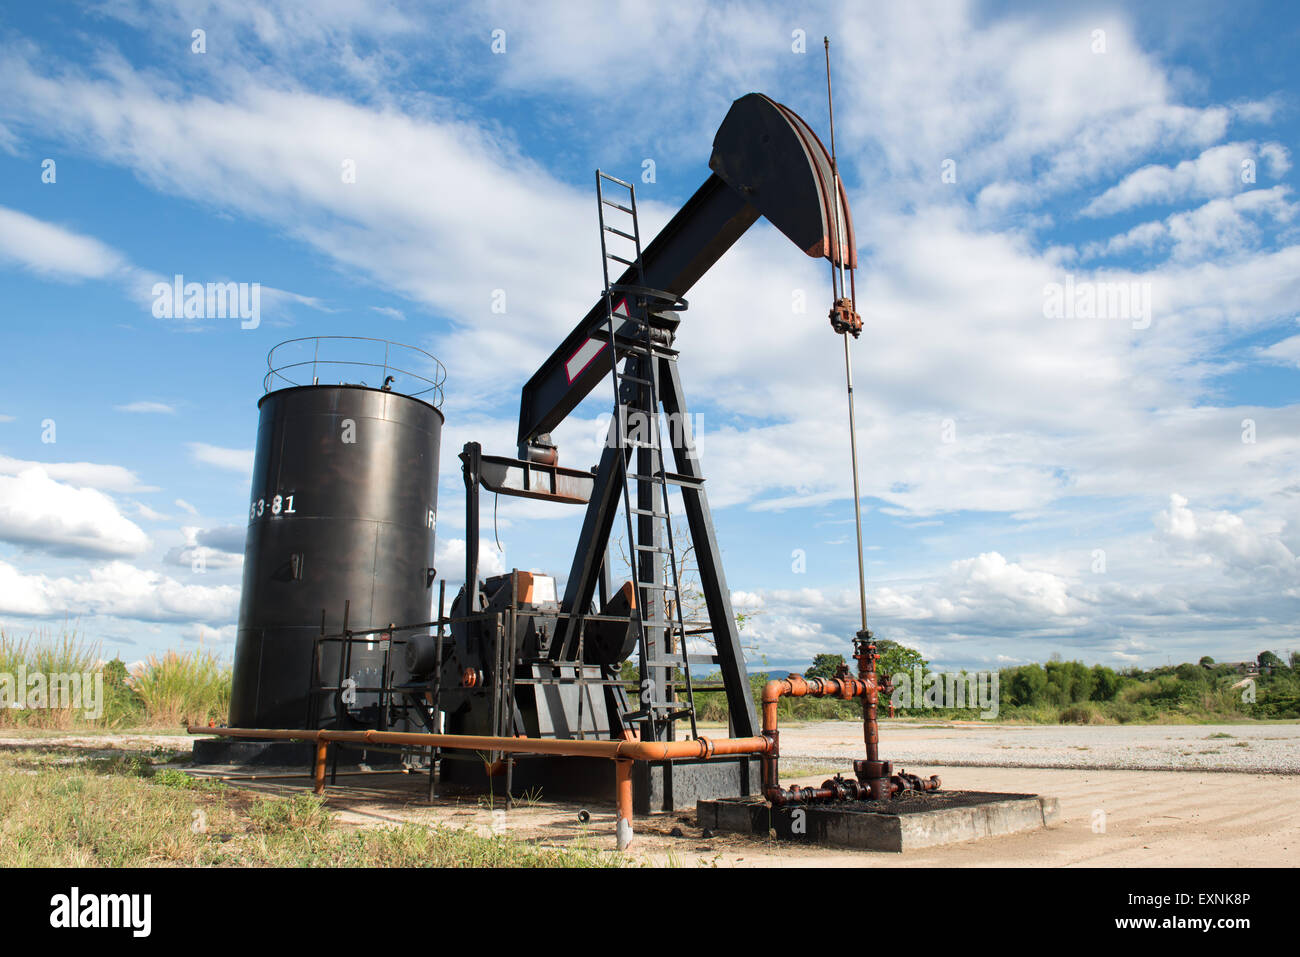 pumpjack pumping crude oil from oil well Stock Photo